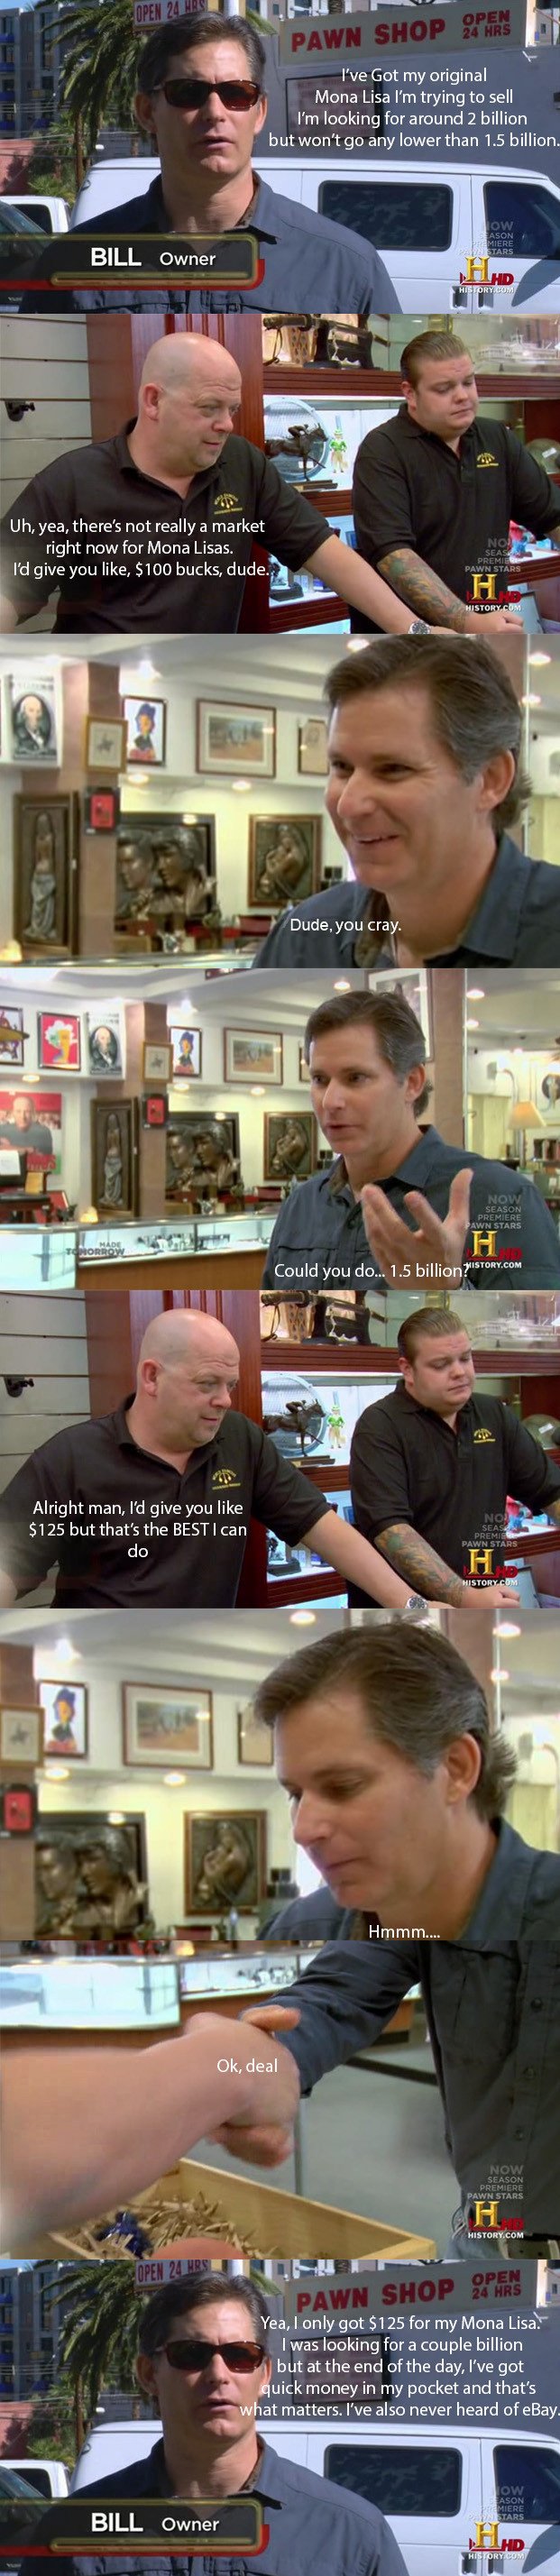 How pawn shops work.